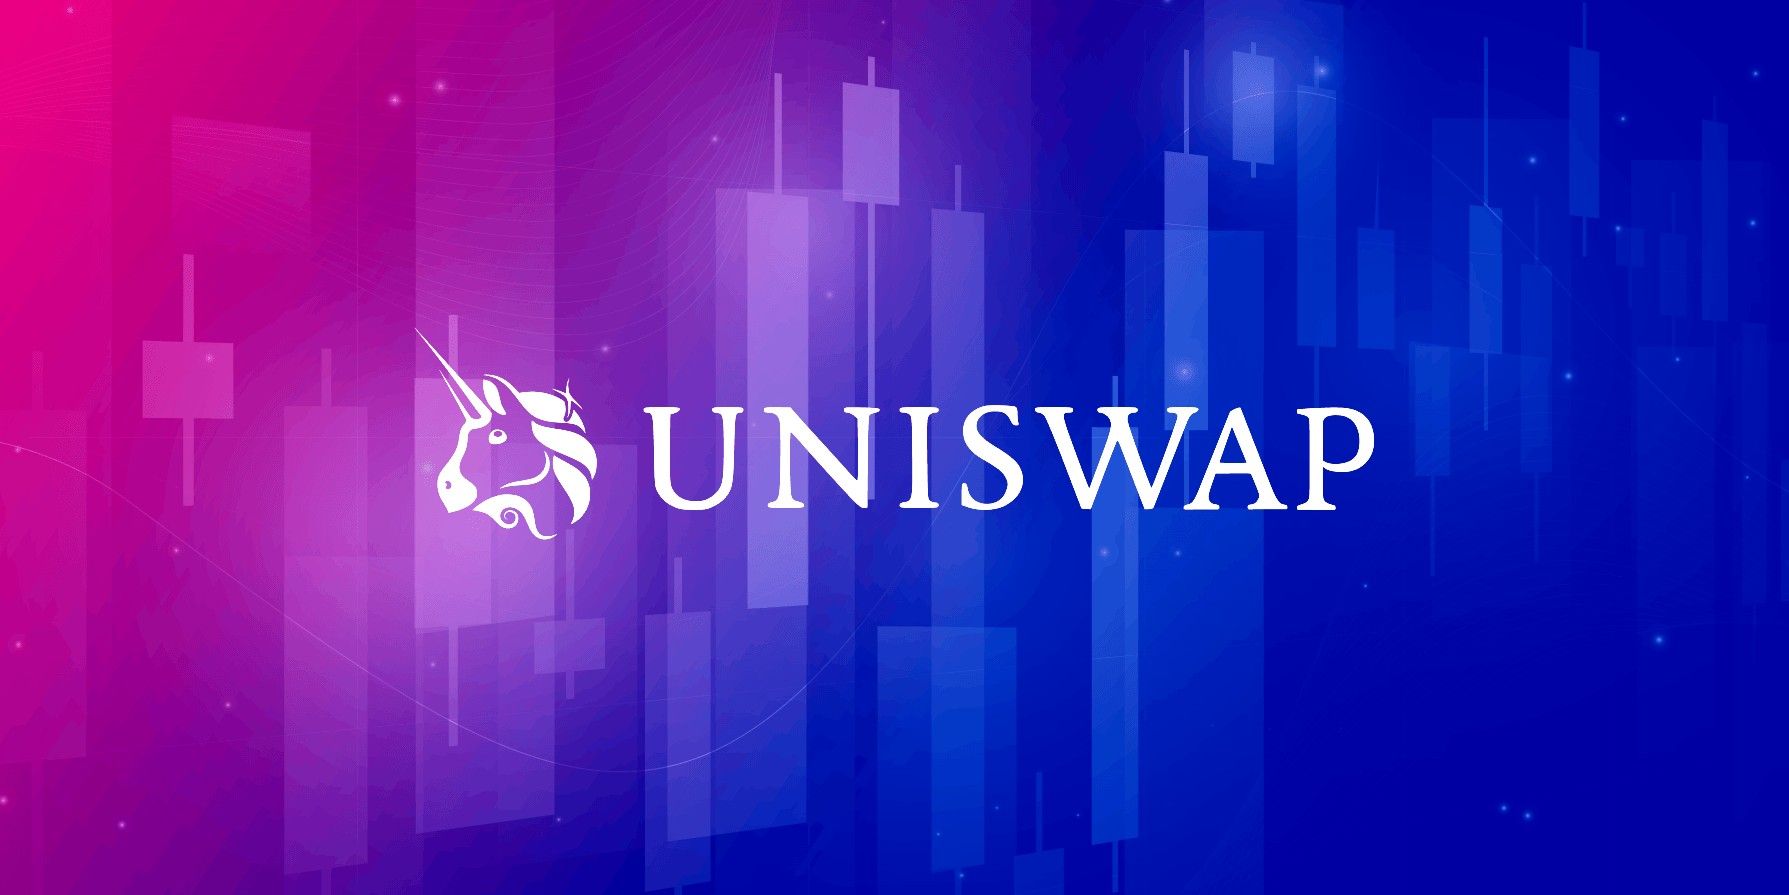 Uniswap Logo on digital blue and purple gradient background, with faded price candlesticks in background